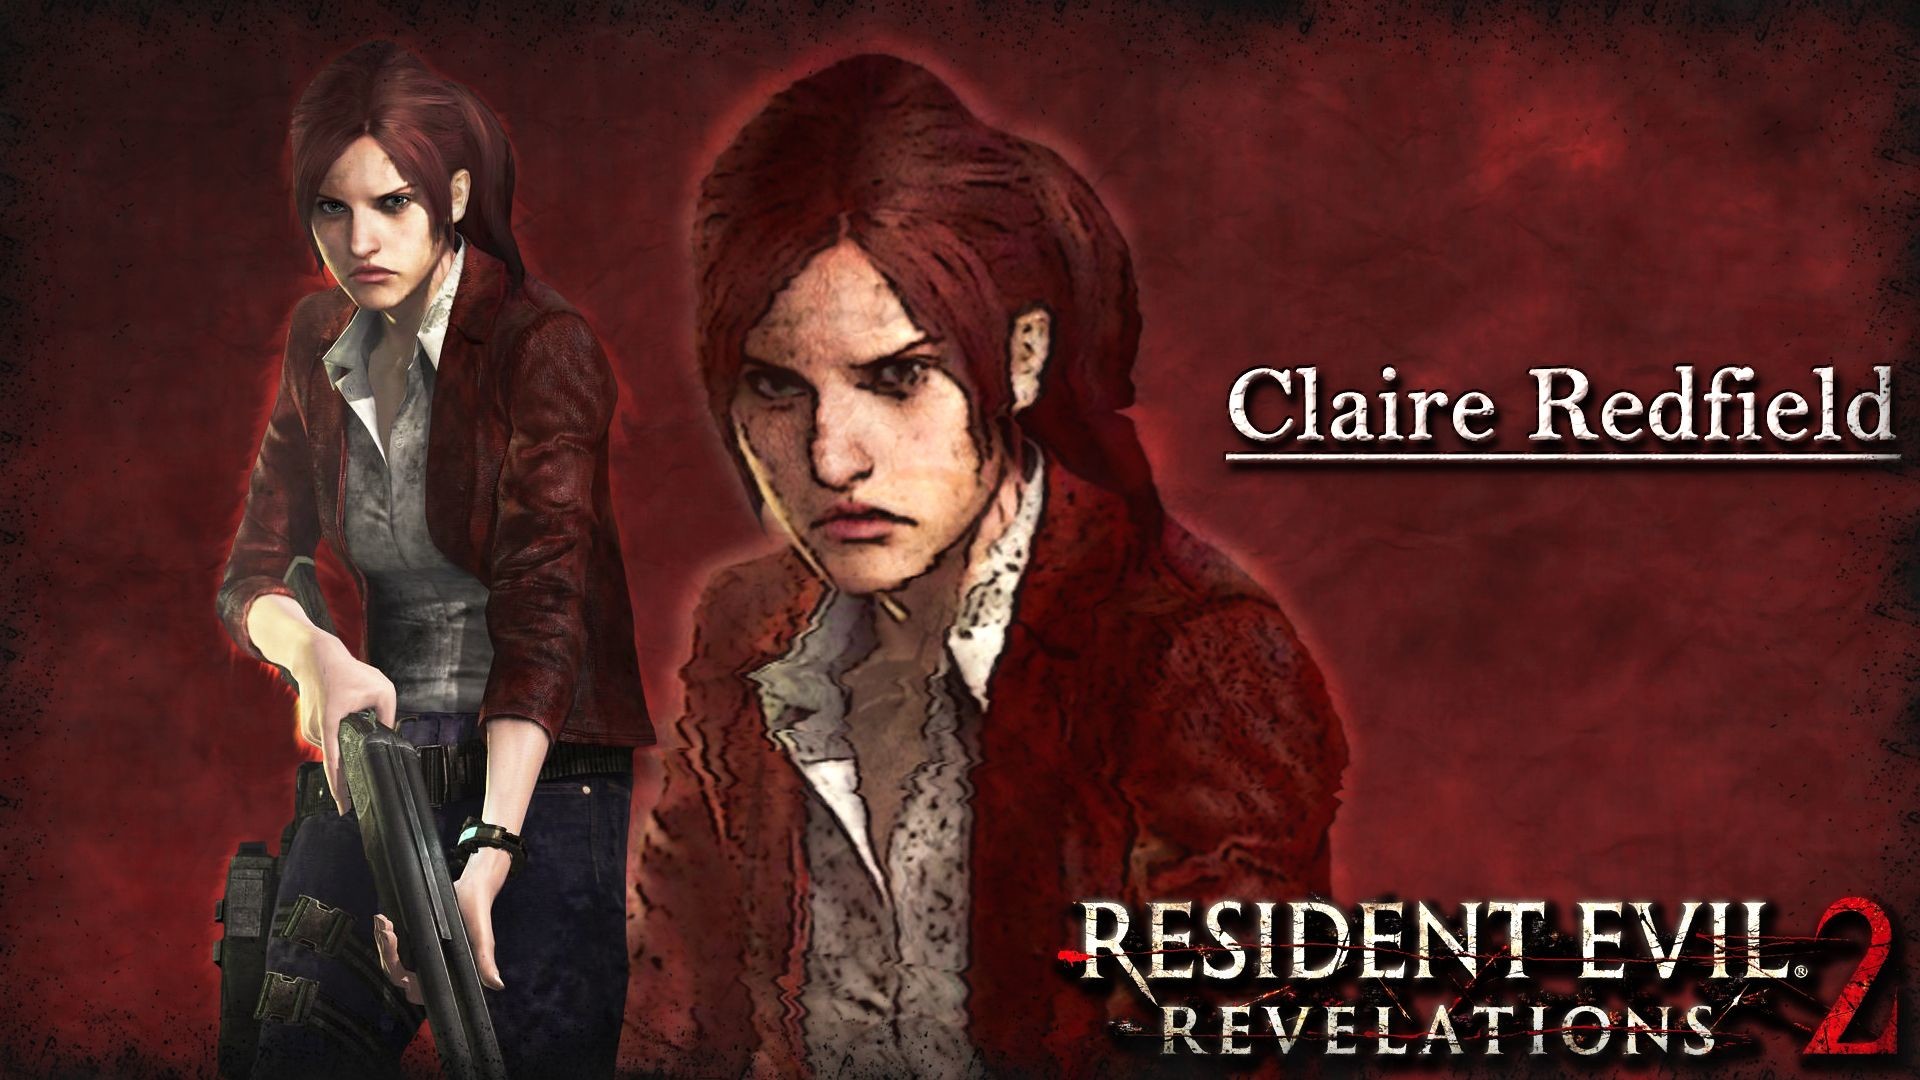 1920x1080 Resident Evil Revelations 2 - Claire Redfield